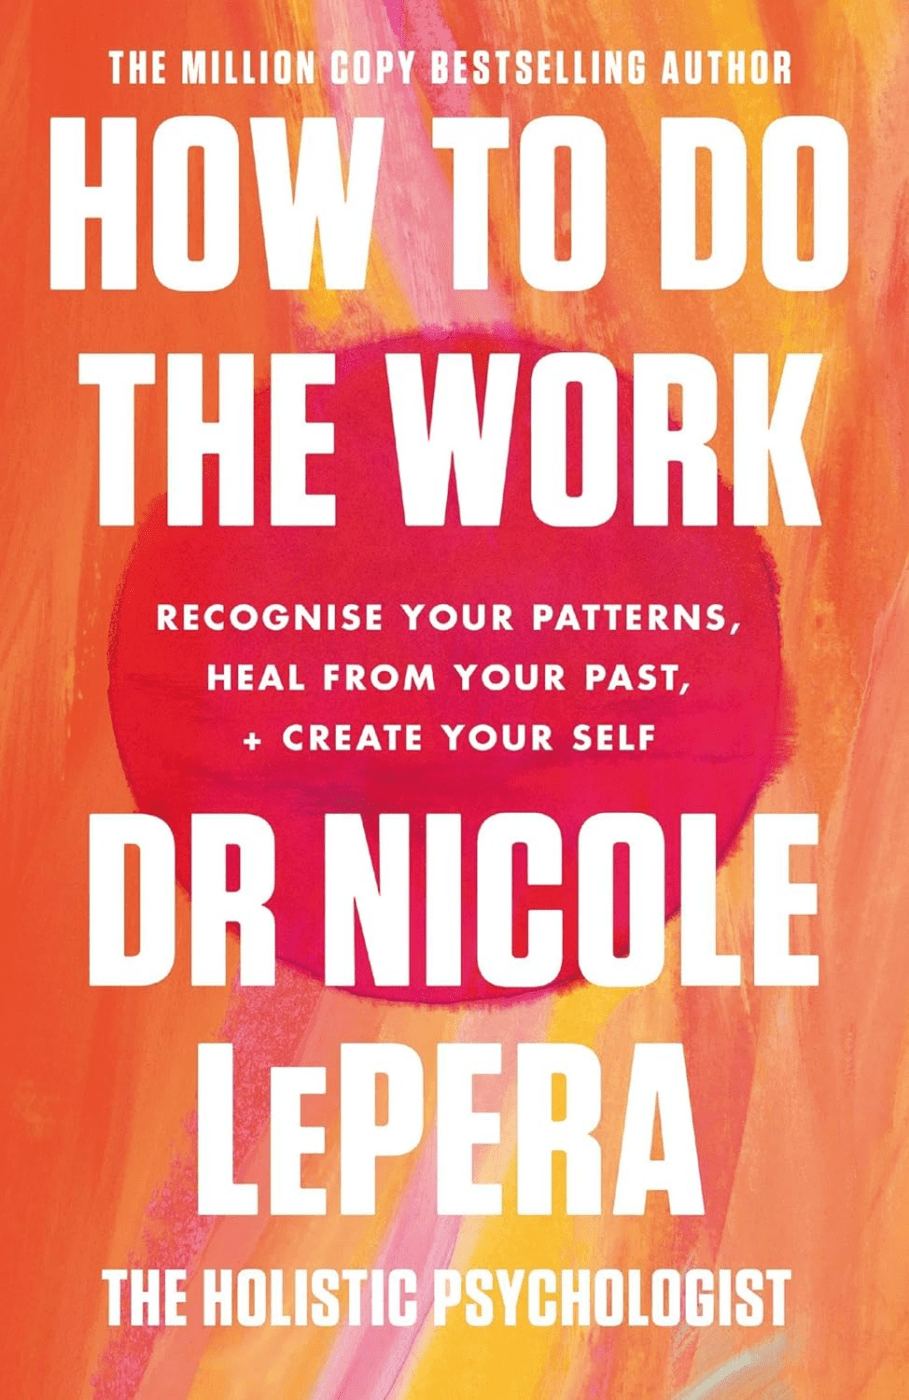 How to Do the Work by Dr. Nicole LePera